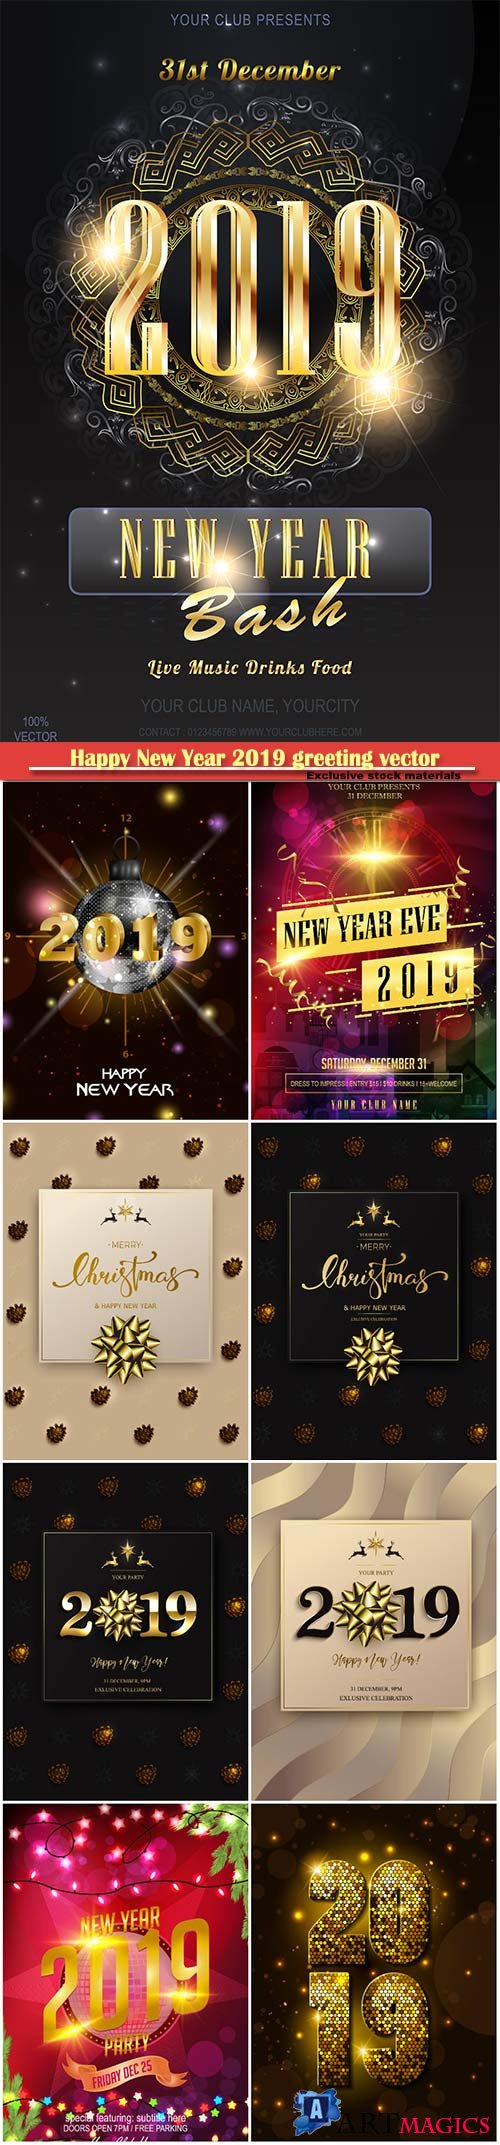 Happy New Year 2019 greeting vector background